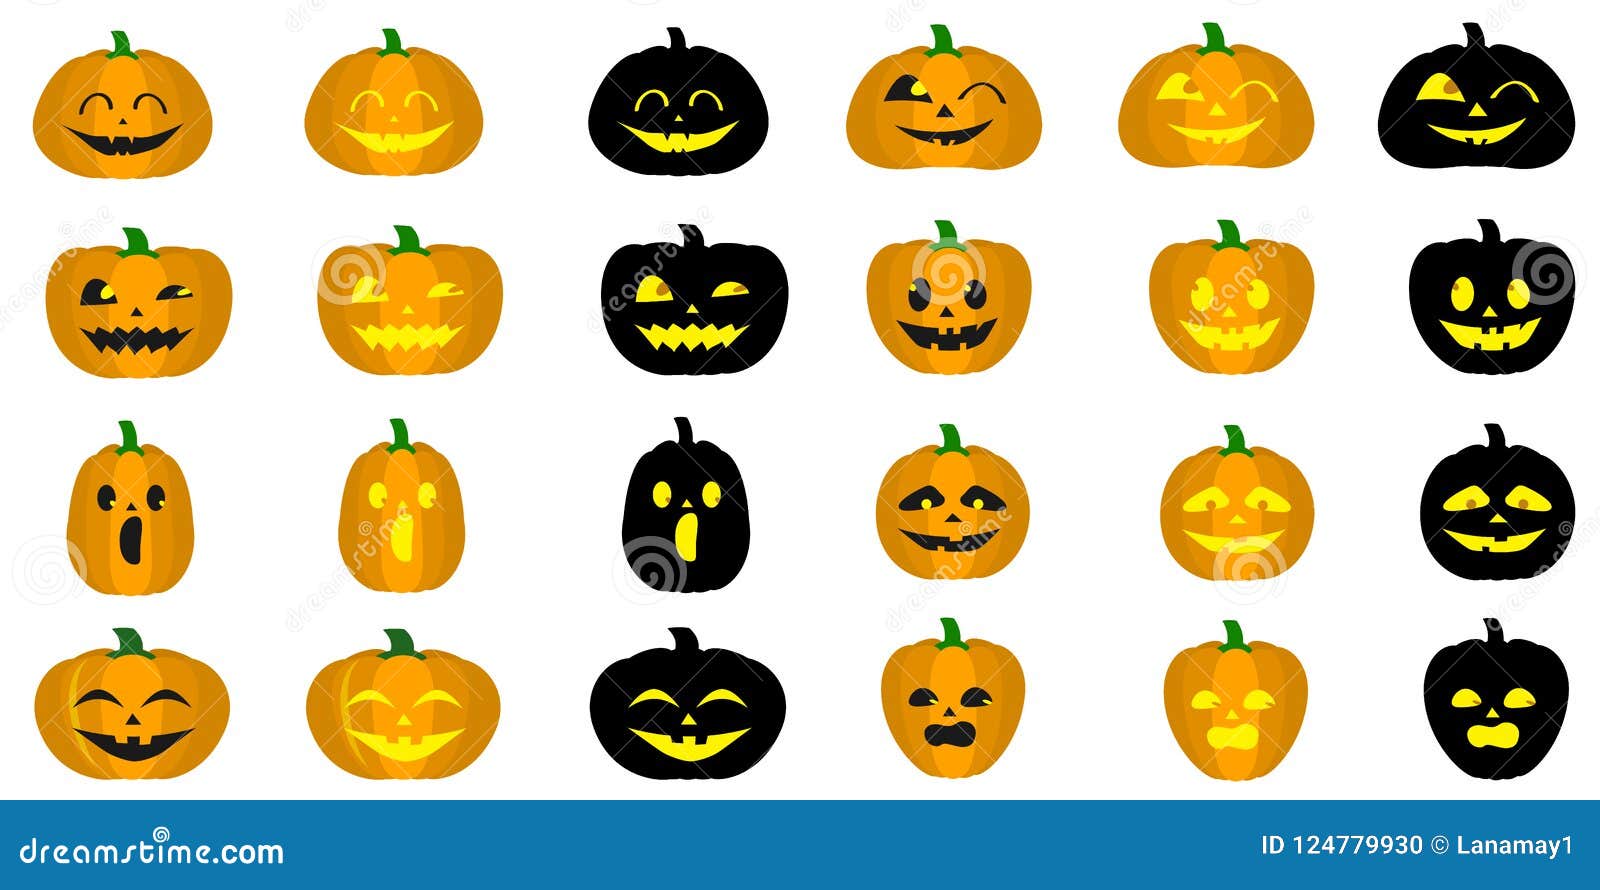 Mega Set of Different Halloween Pumpkins, Funny Faces in Cartoon Style ...